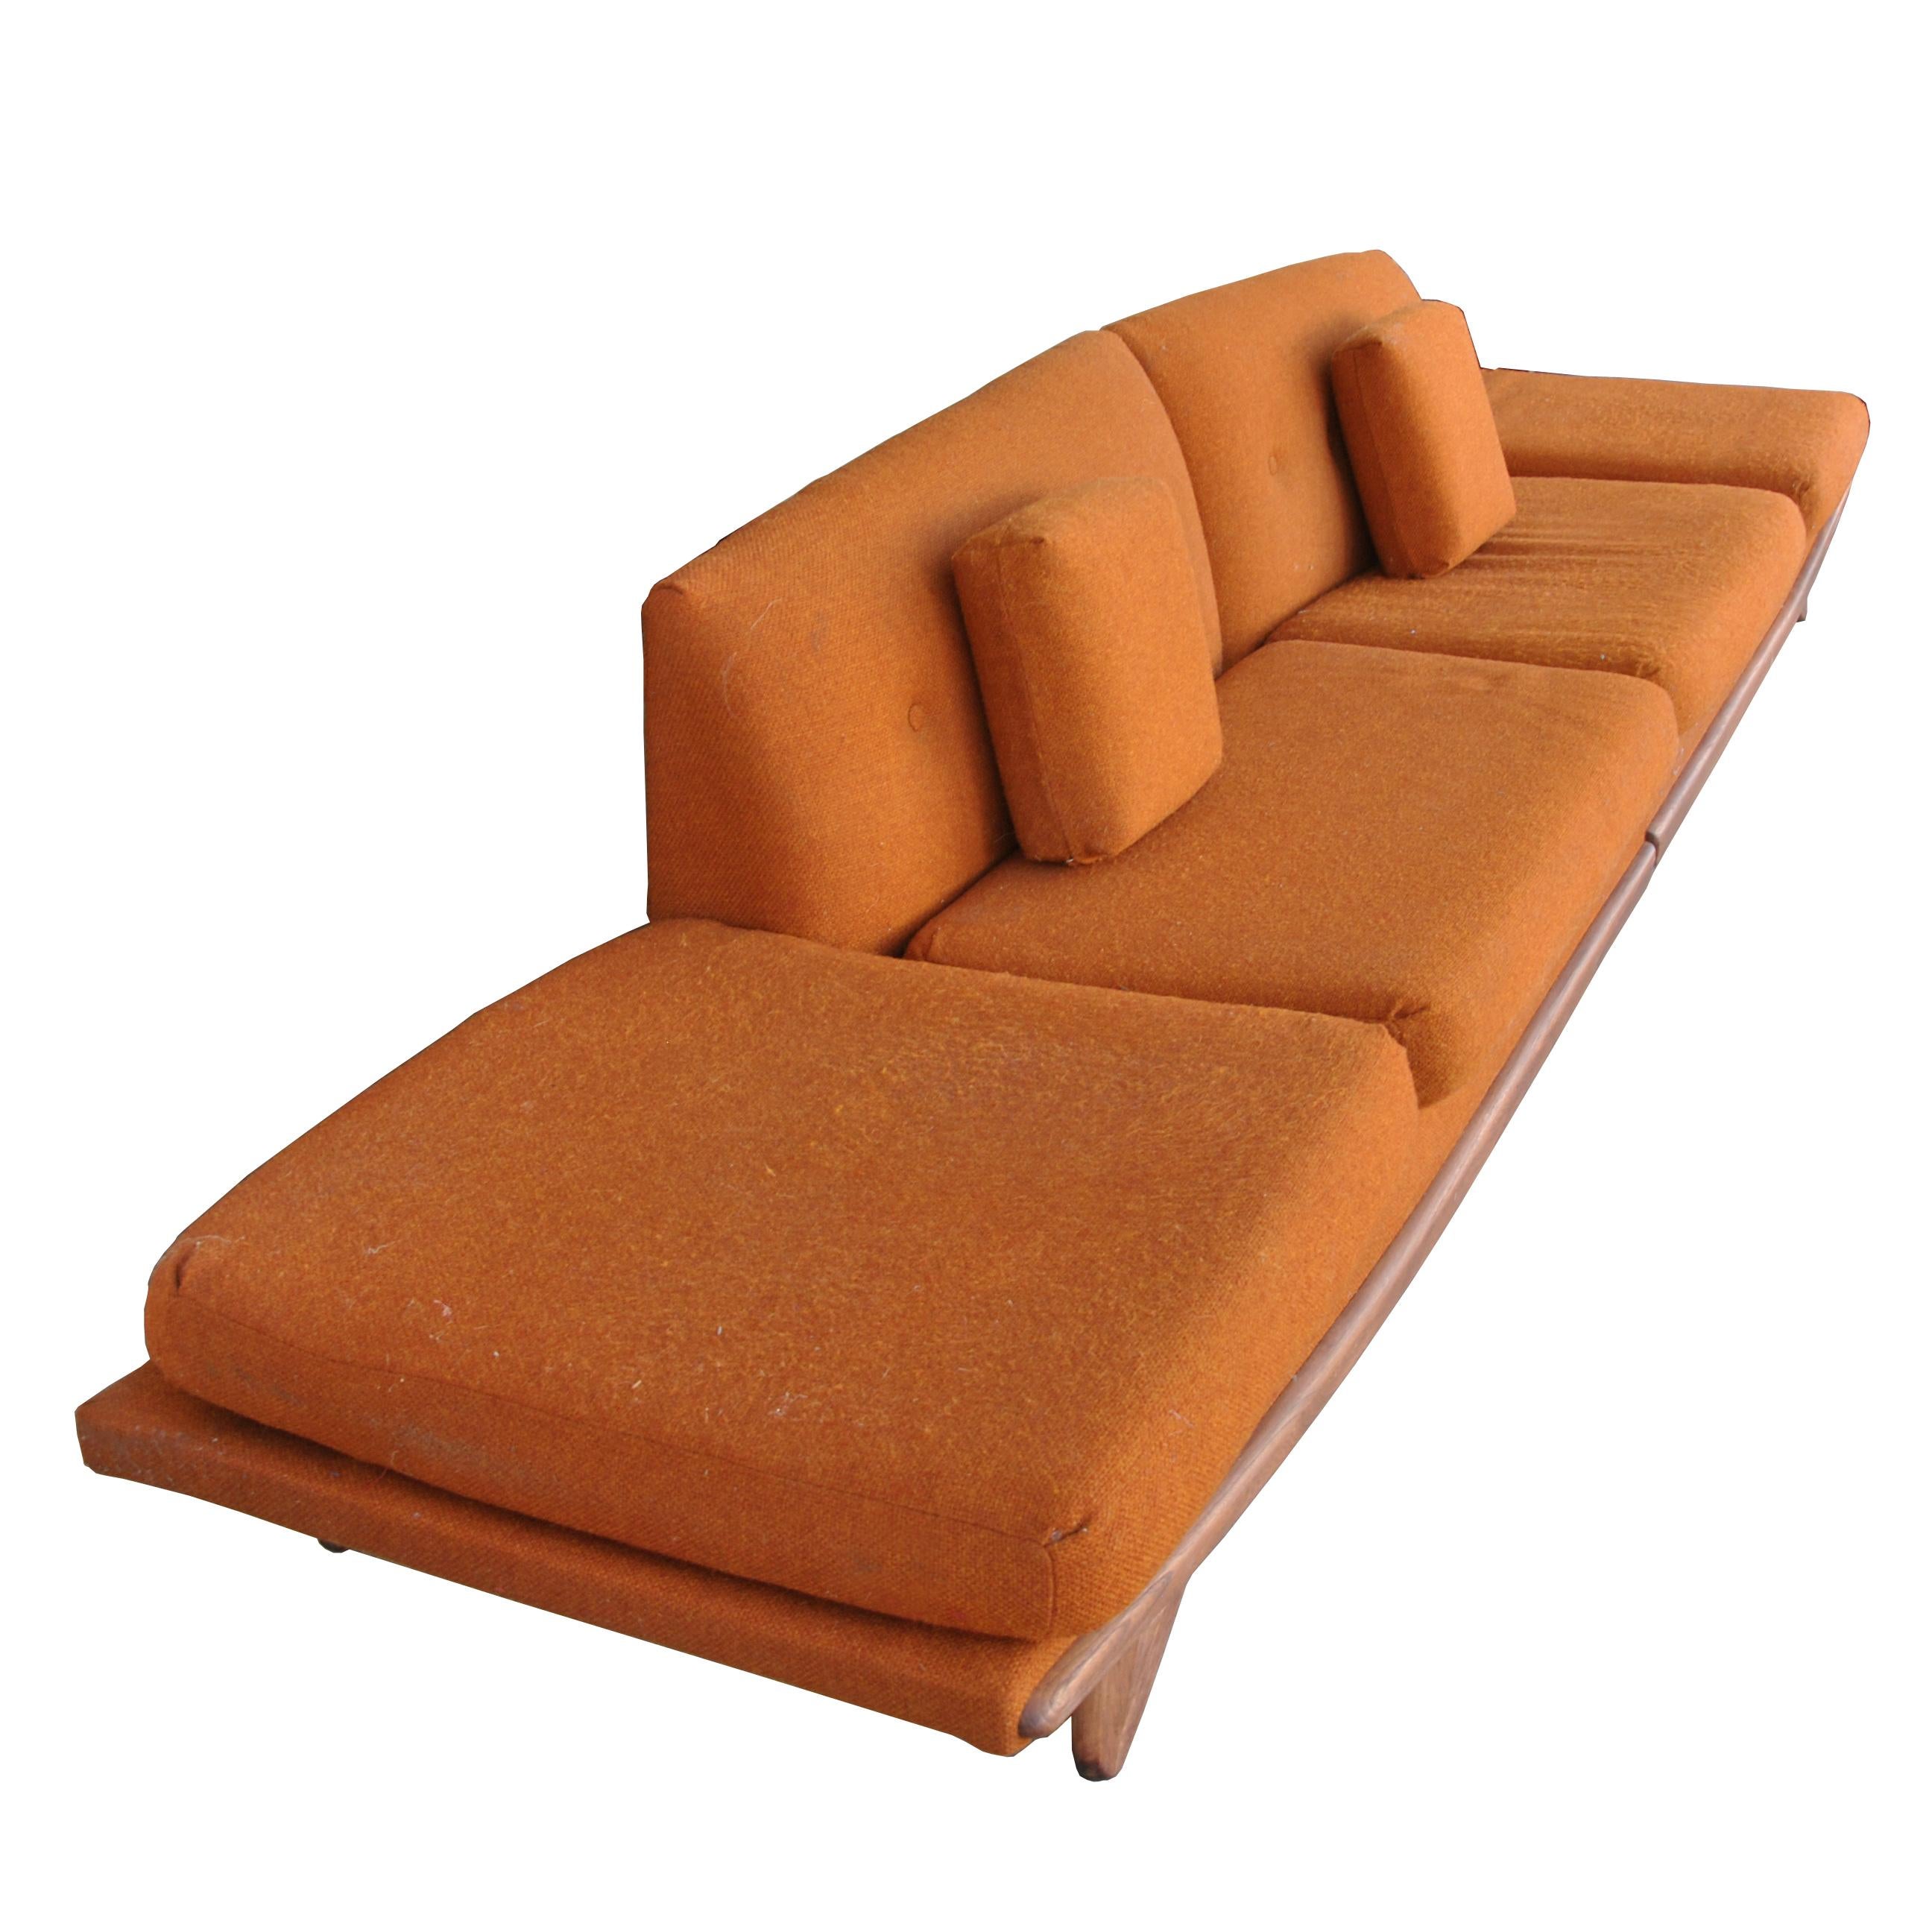 A mid-century modern sectional sofa designed by Adrian Pearsall and made by Craft Associates.  Two 6ft sections that can be positioned end to end for a long sofa or used as two separate sofas.  Sculpted walnut base with orange tweed upholstery. 